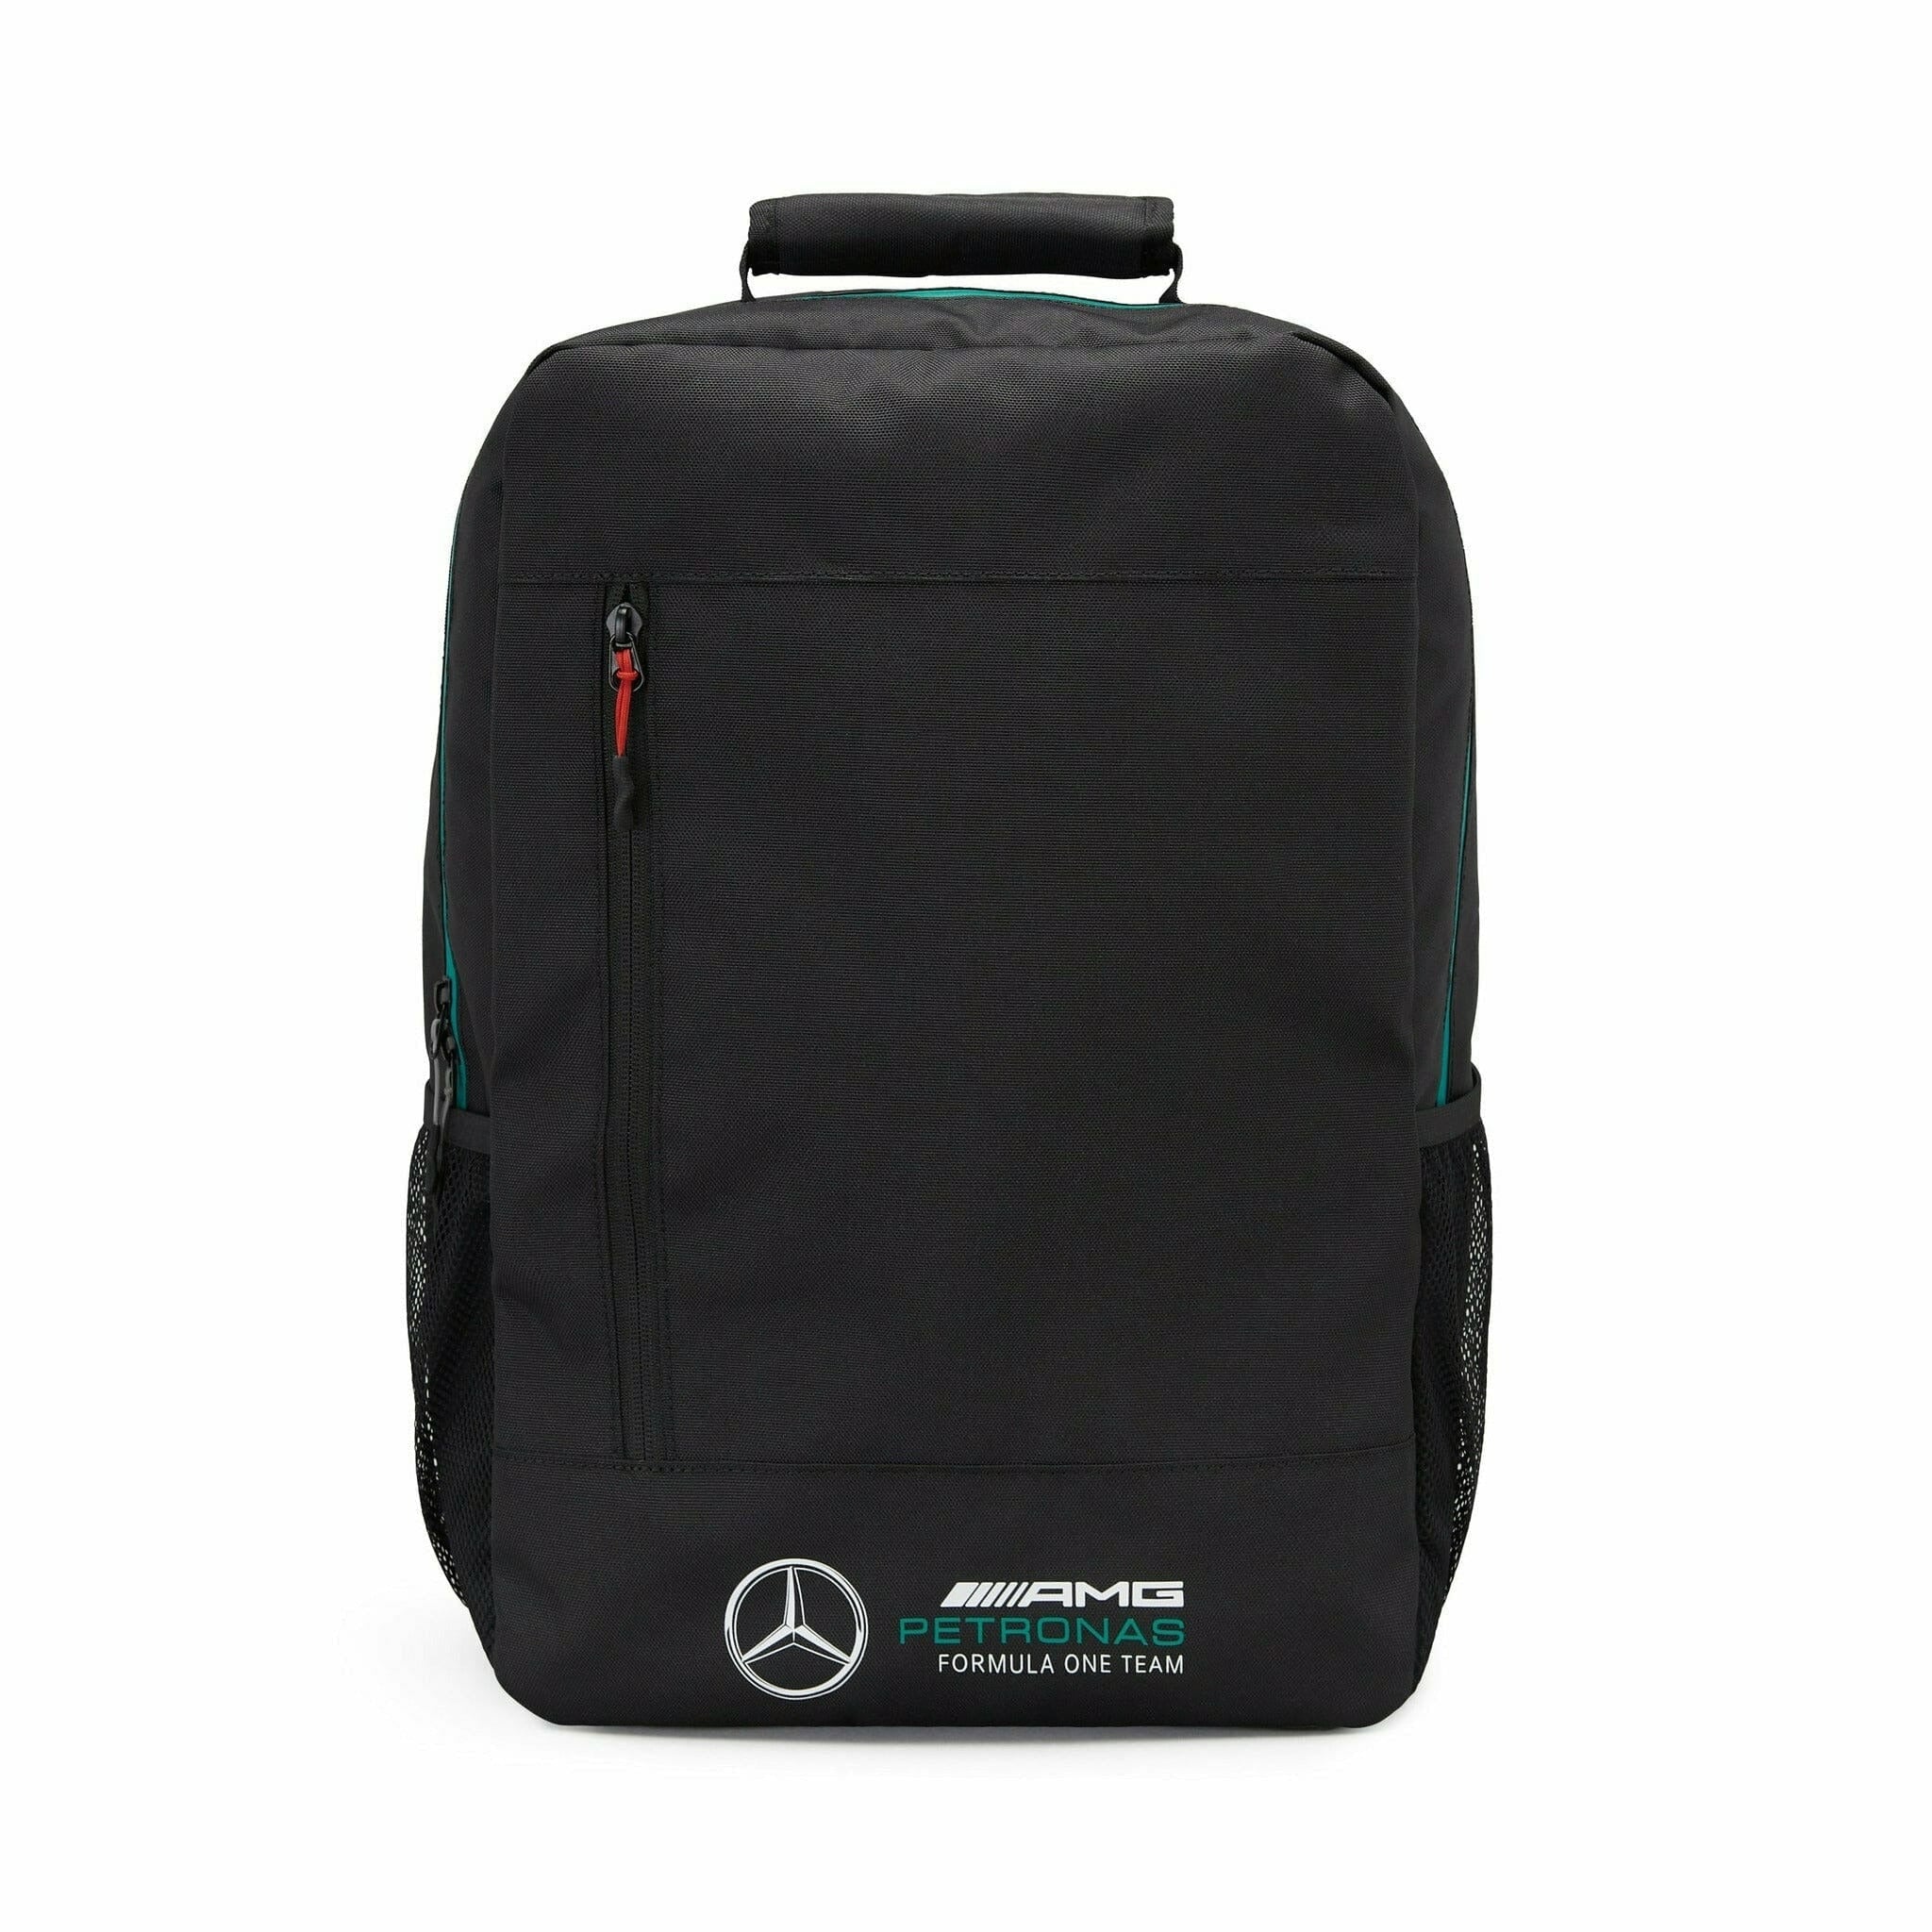 Mercedes-Benz Herfest collaboration backpack Nylon material Black color  Casual